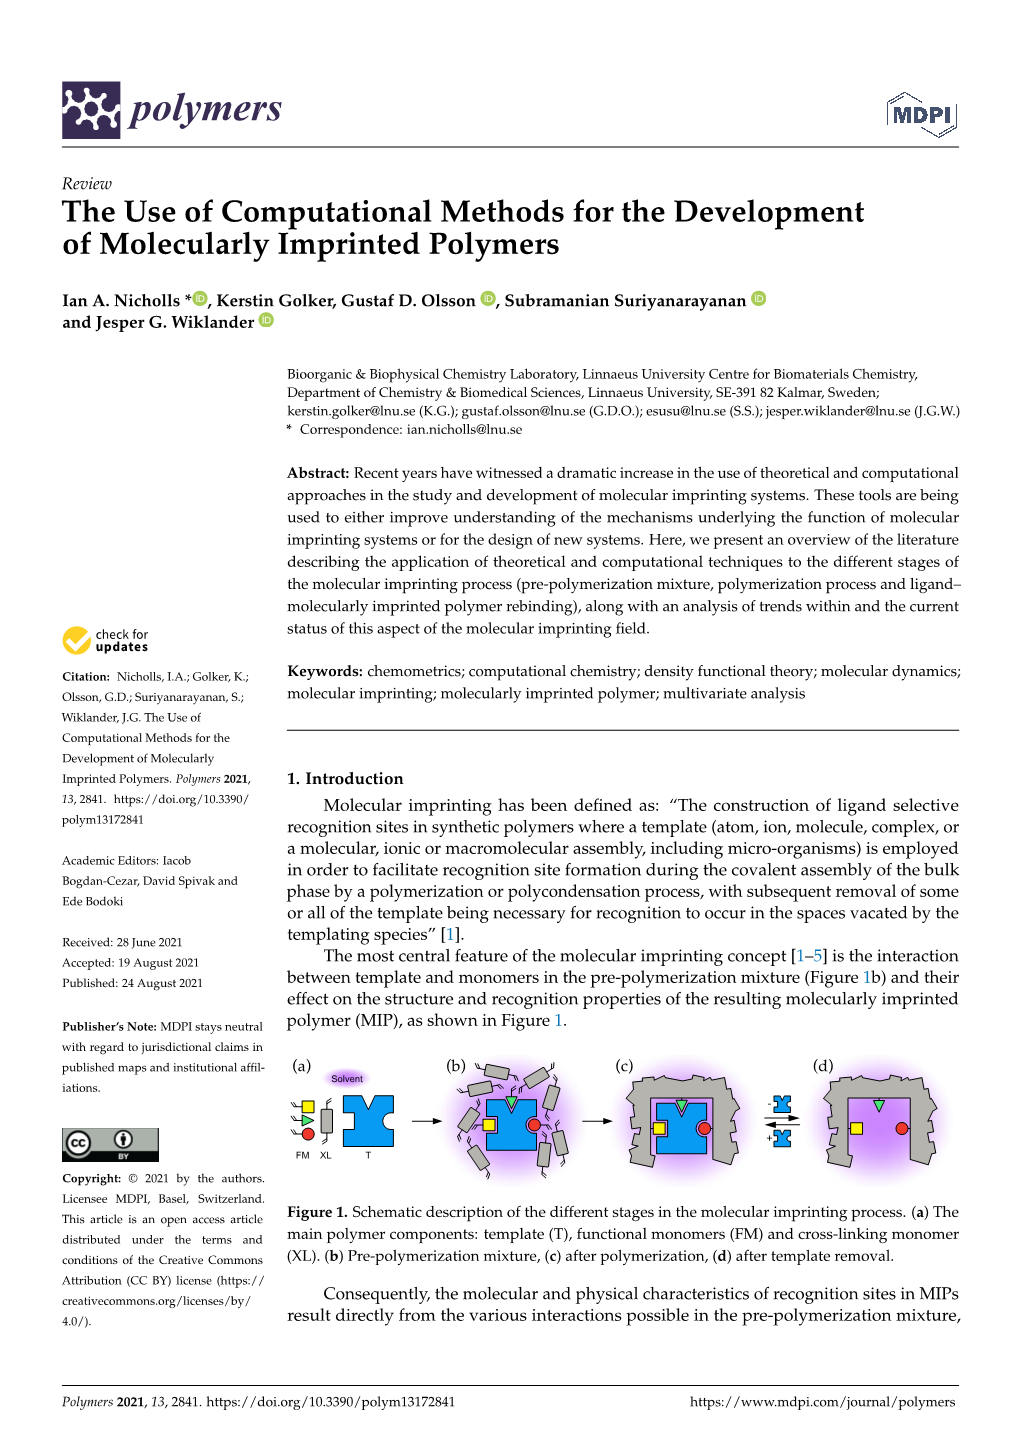 The Use of Computational Methods for the Development of Molecularly